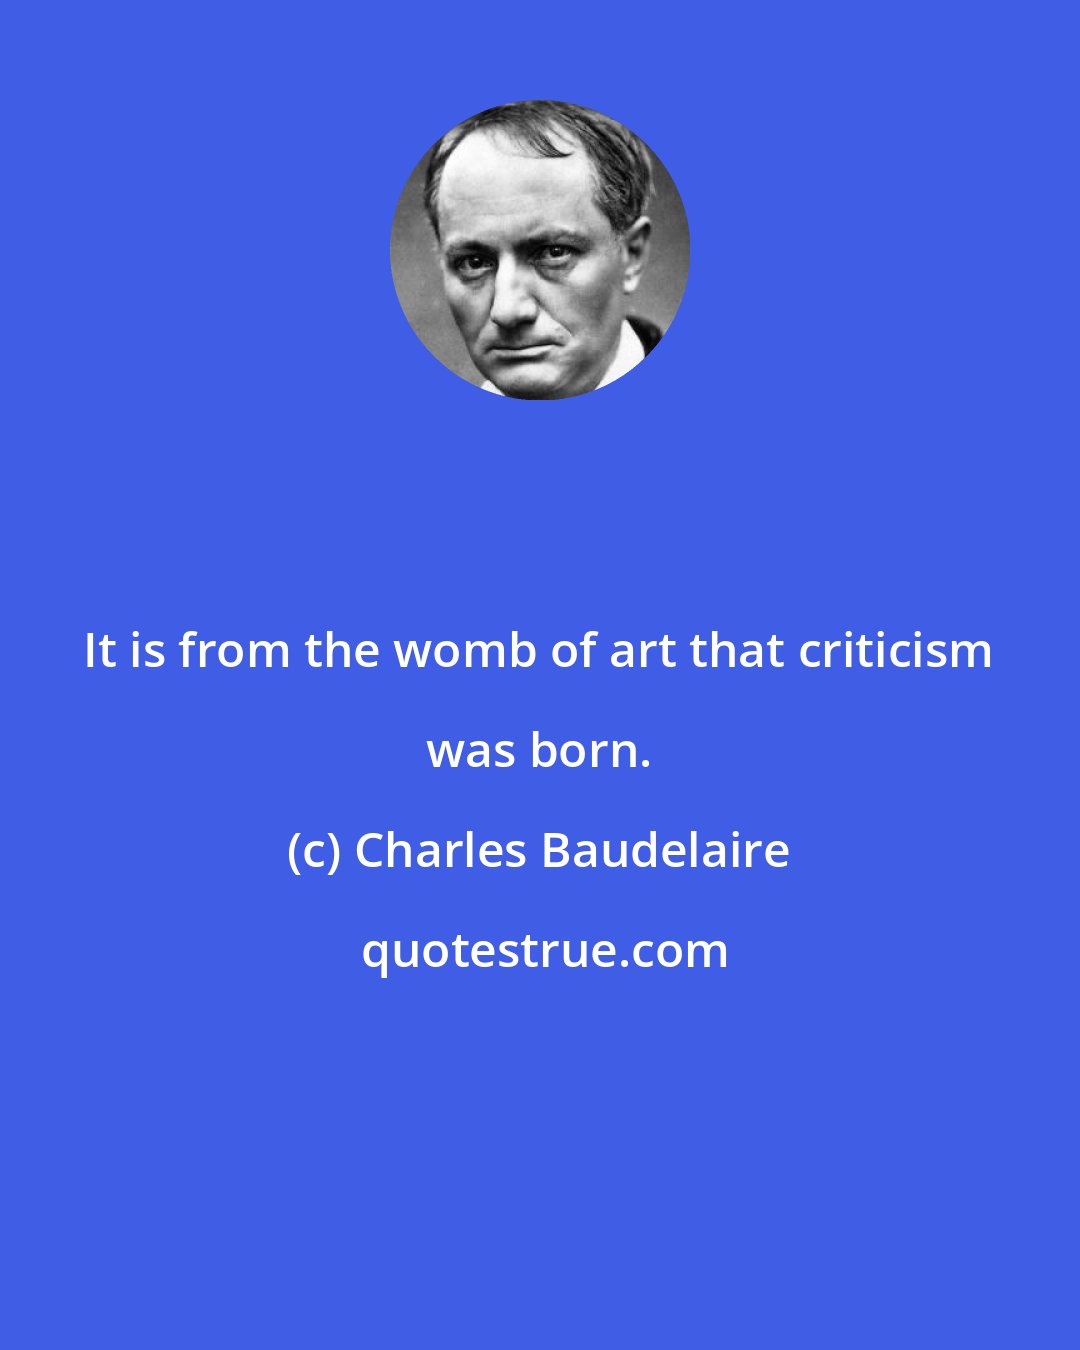 Charles Baudelaire: It is from the womb of art that criticism was born.